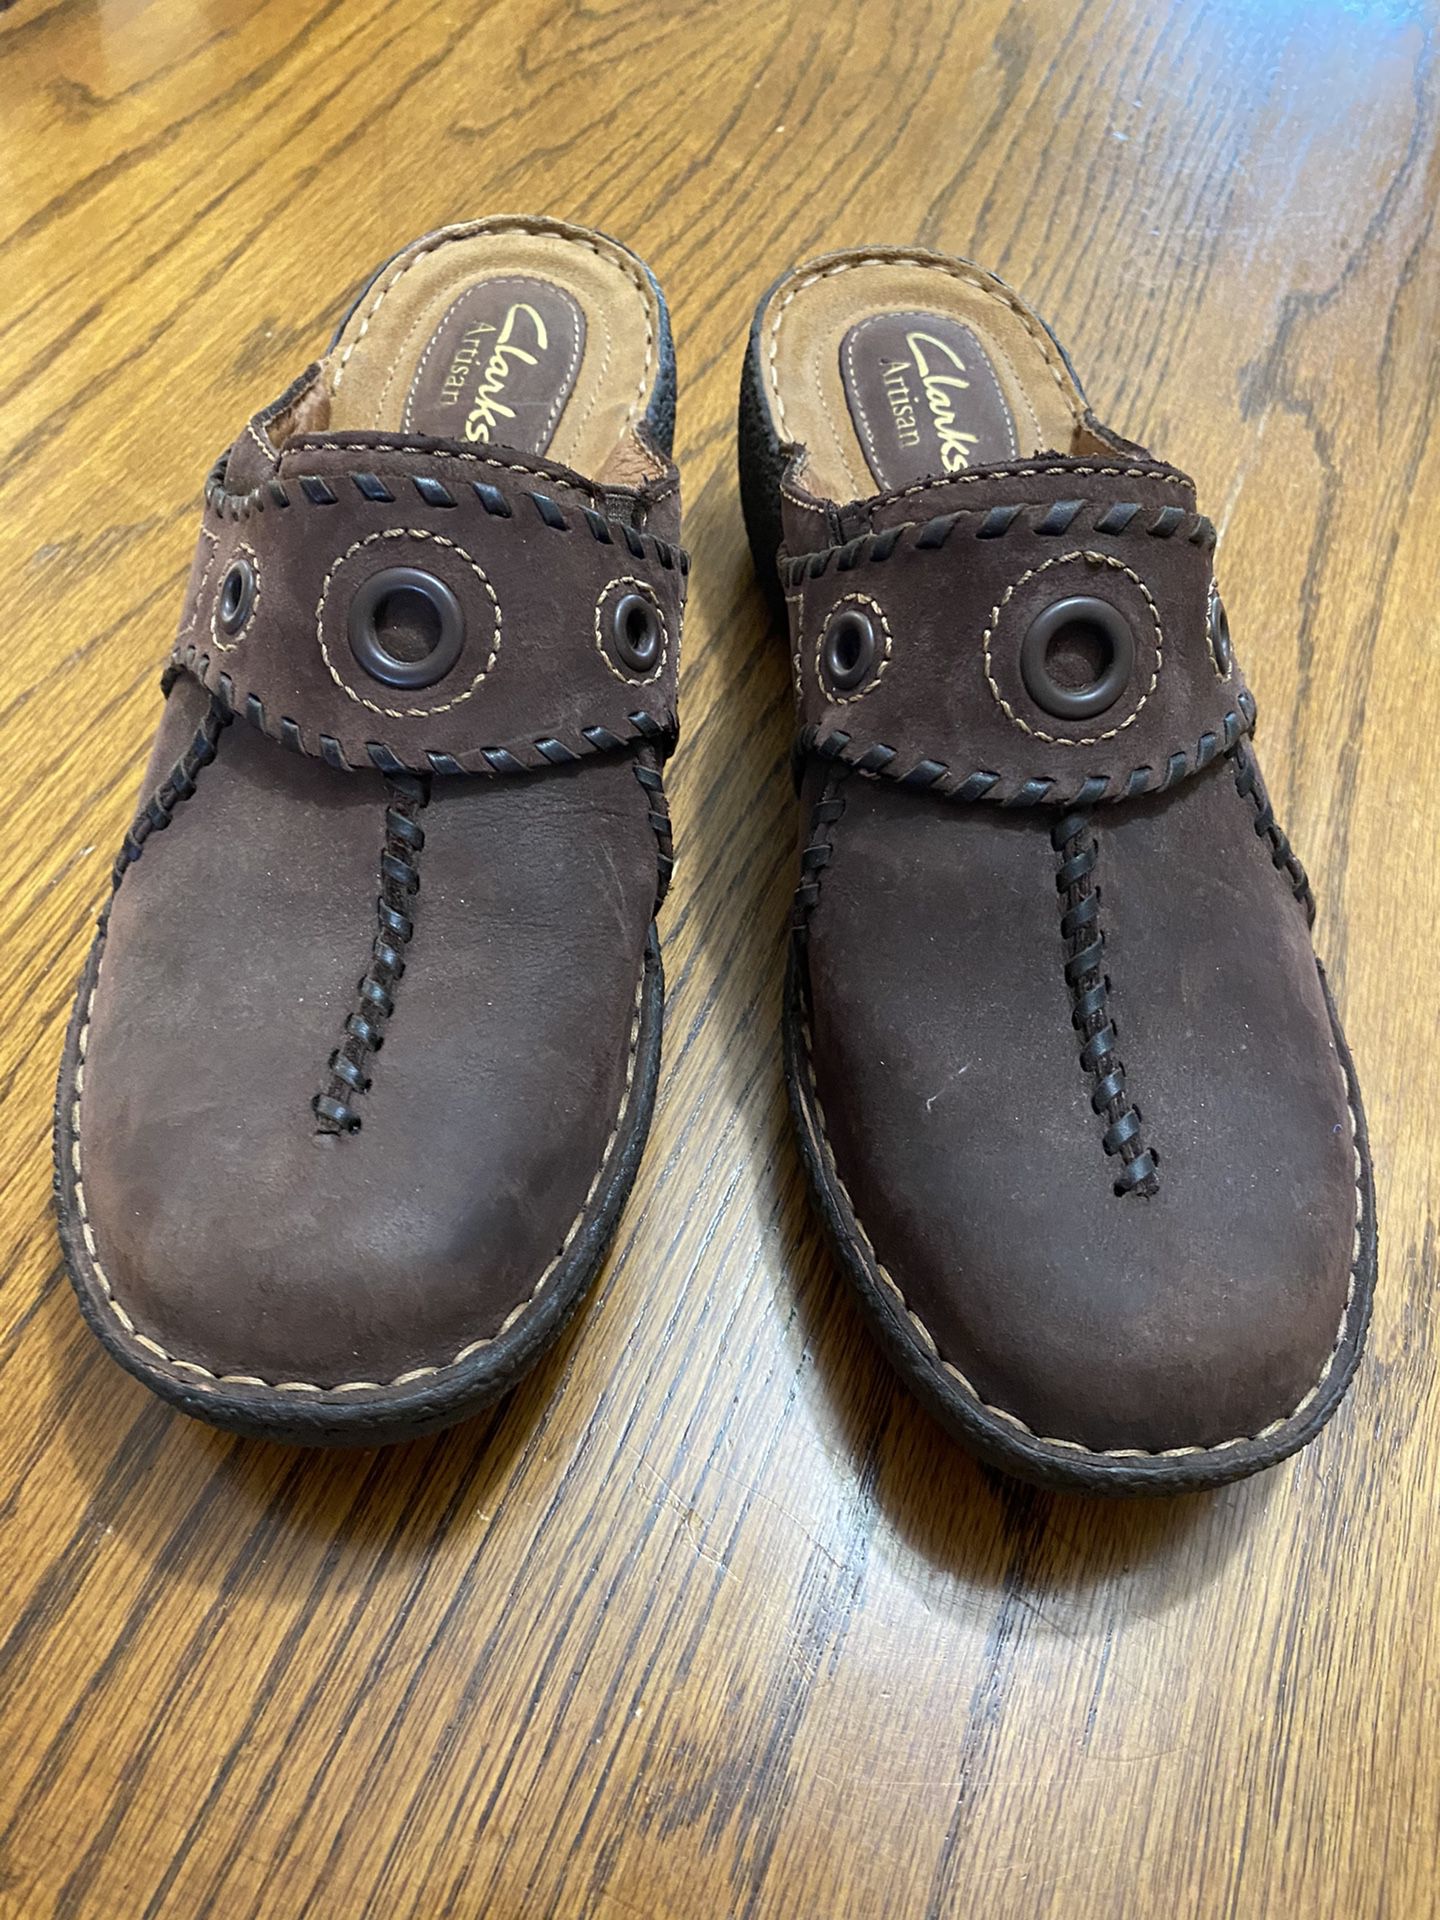 Clarks Artisan Leather Clogs And Trappers Hat for Sale in Rogersville ...